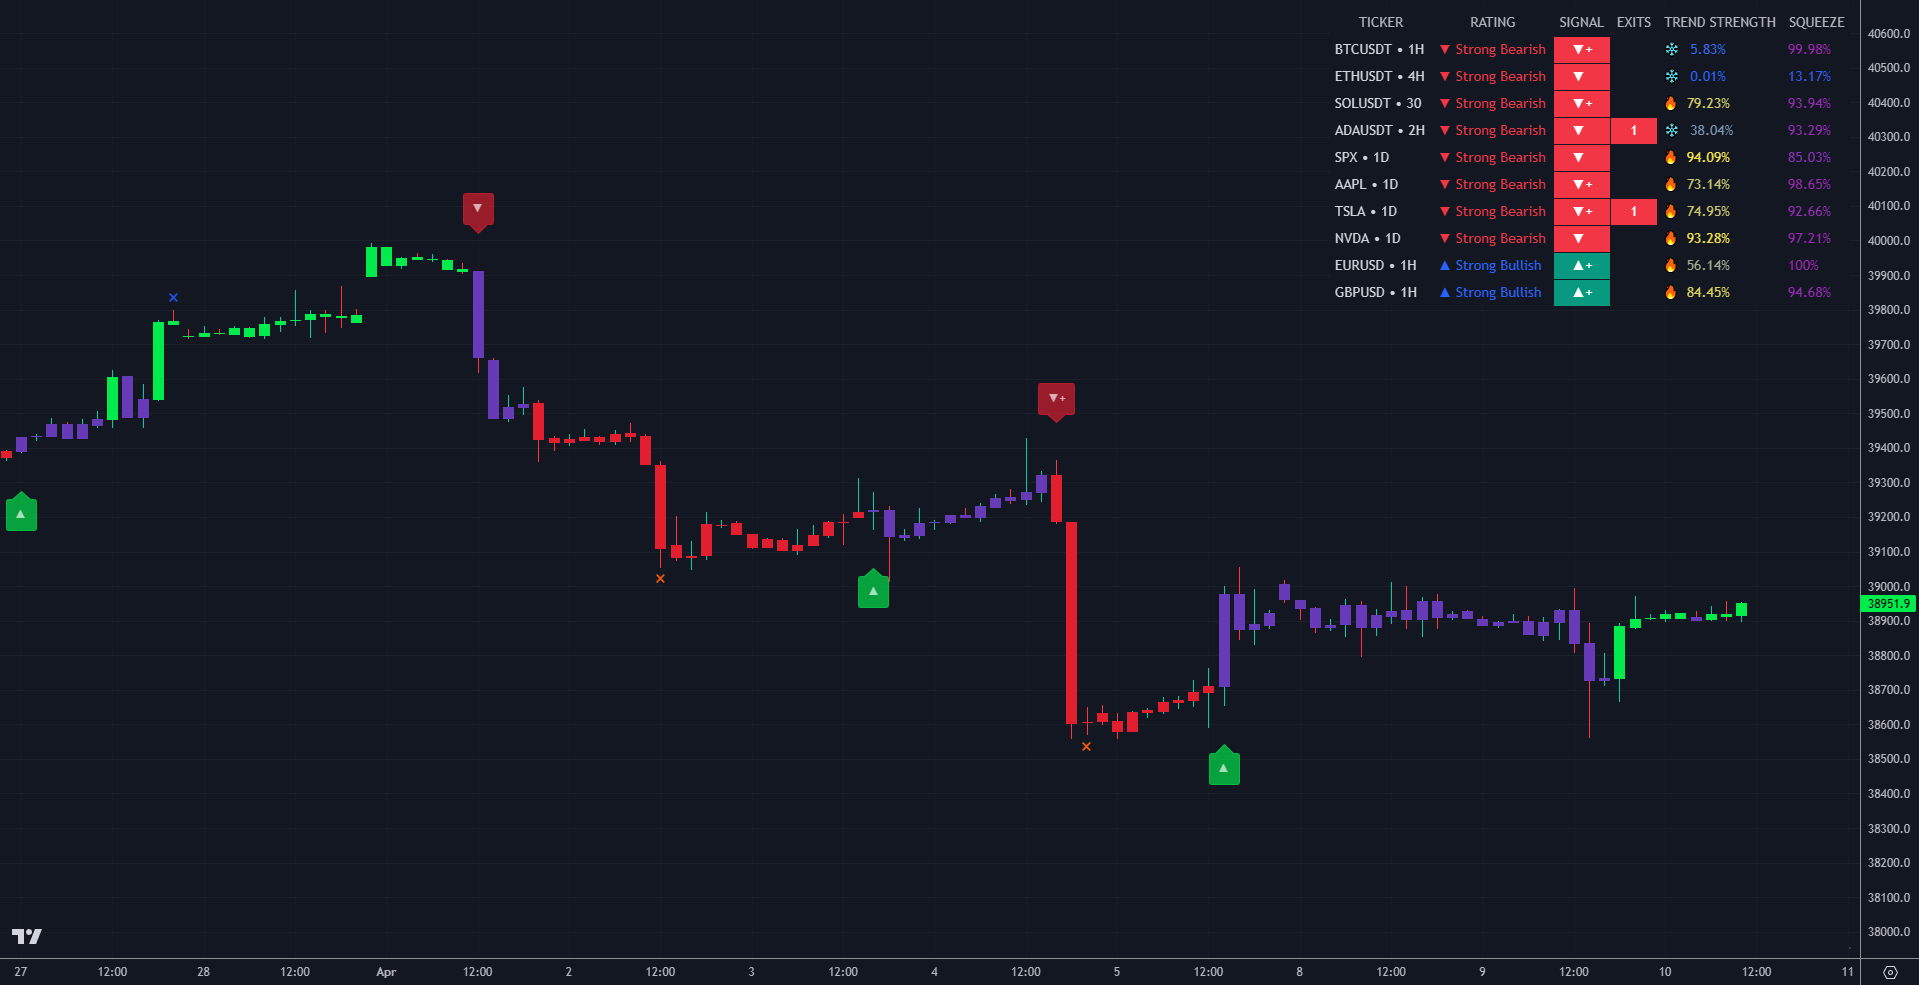 LuxAlgo trading chart showing signals screening feature